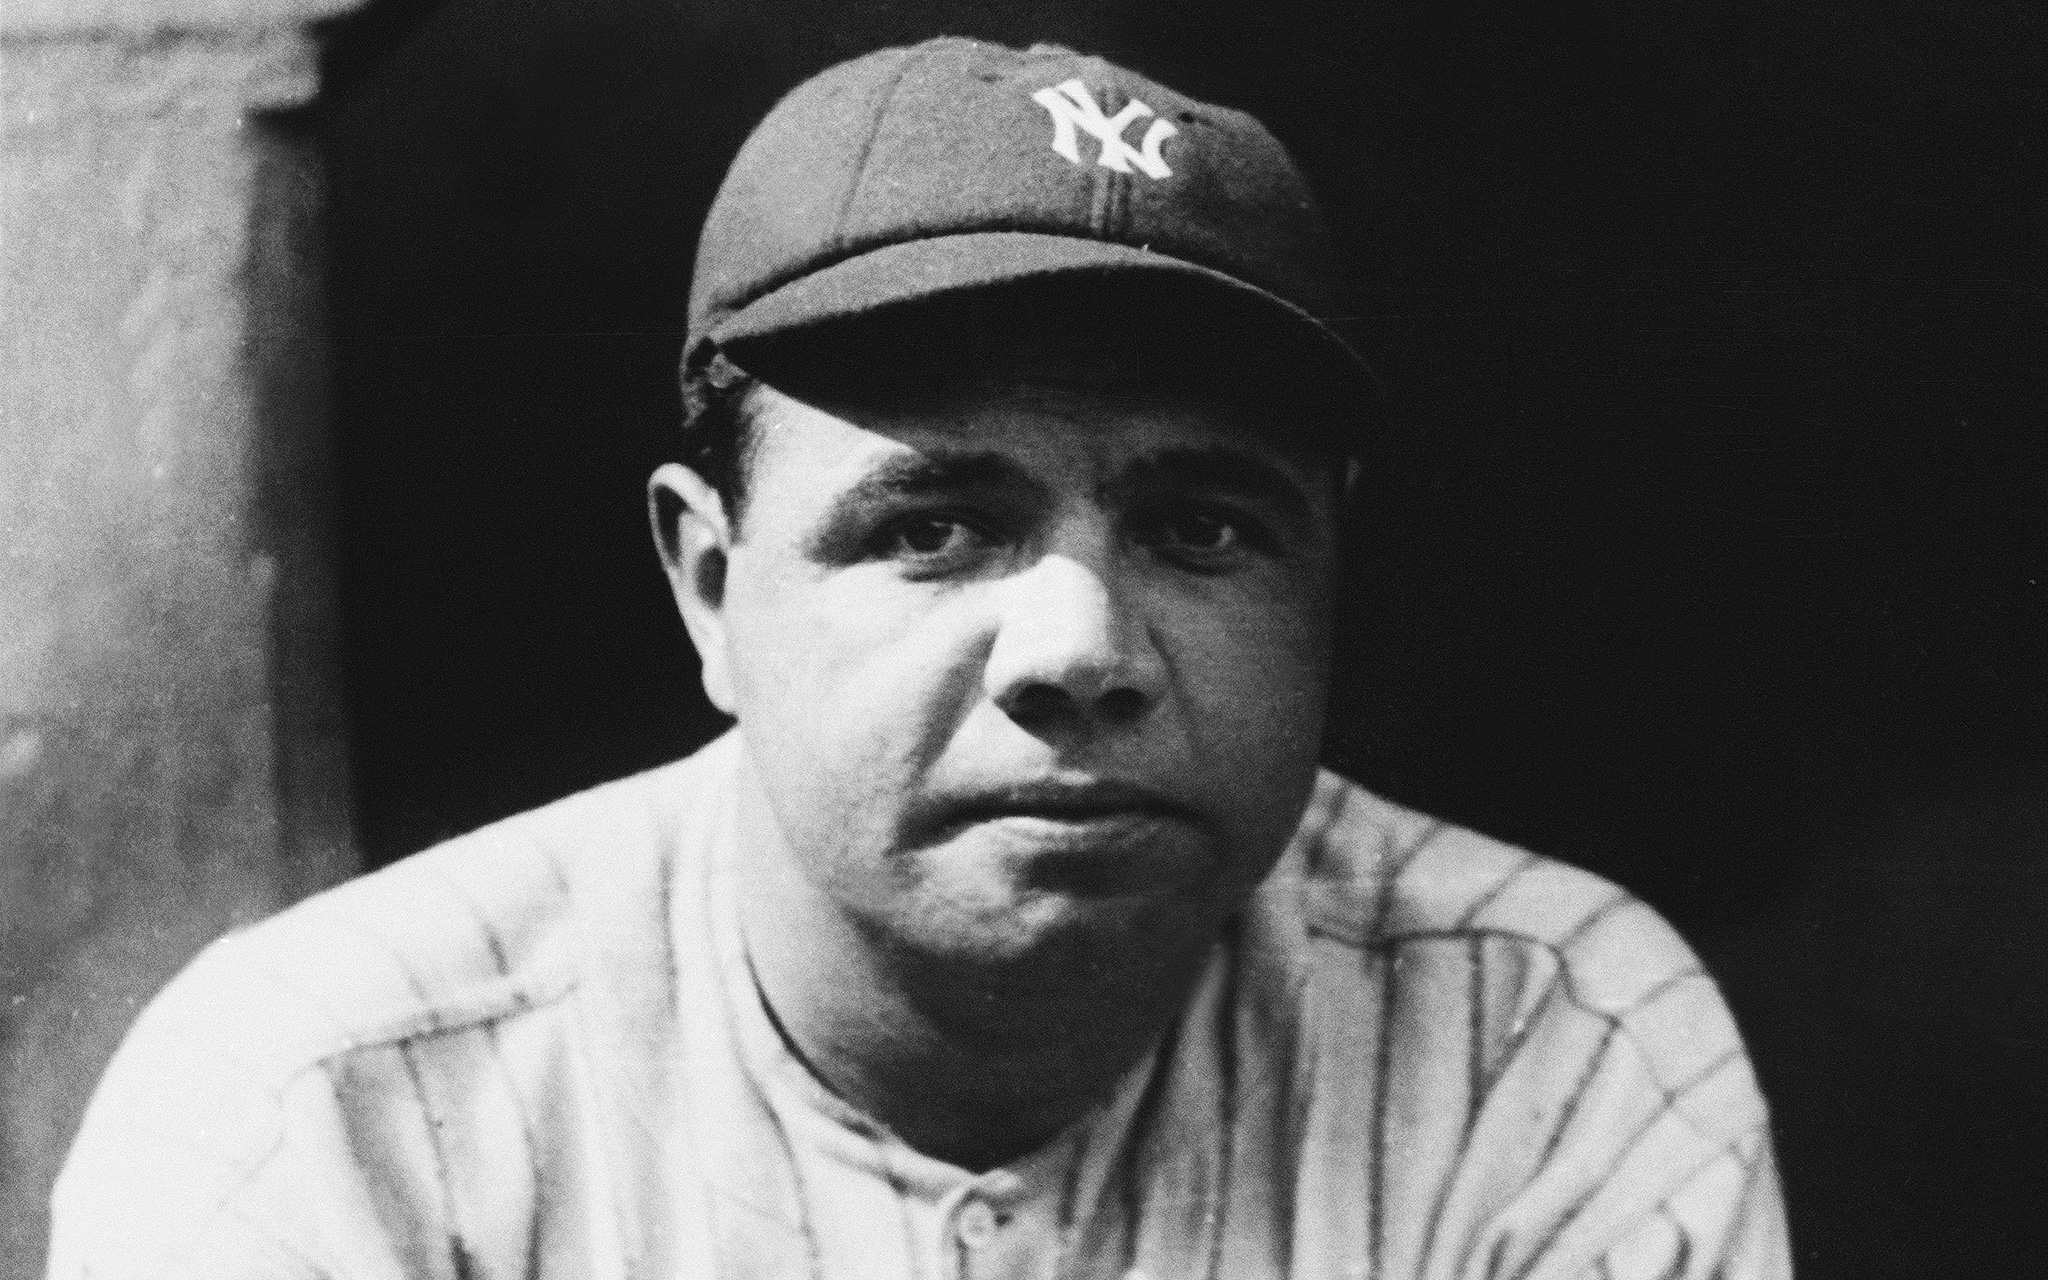 babe ruth red sox number